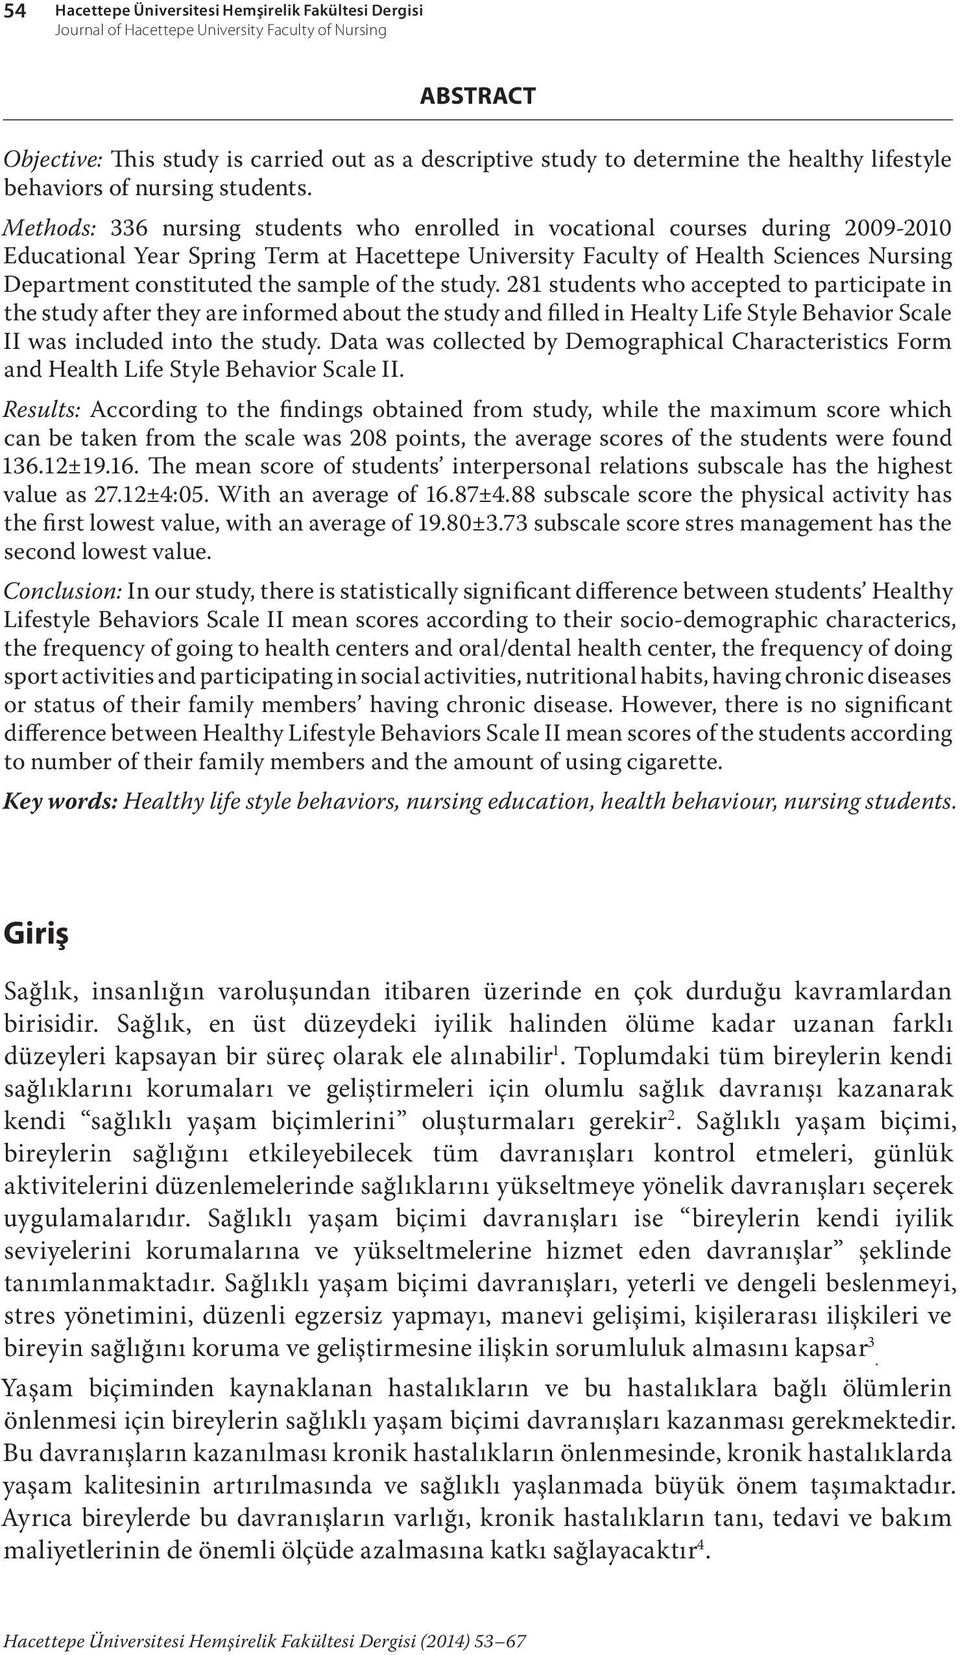 Methods: 336 nursing students who enrolled in vocational courses during 2009-2010 Educational Year Spring Term at Hacettepe University Faculty of Health Sciences Nursing Department constituted the